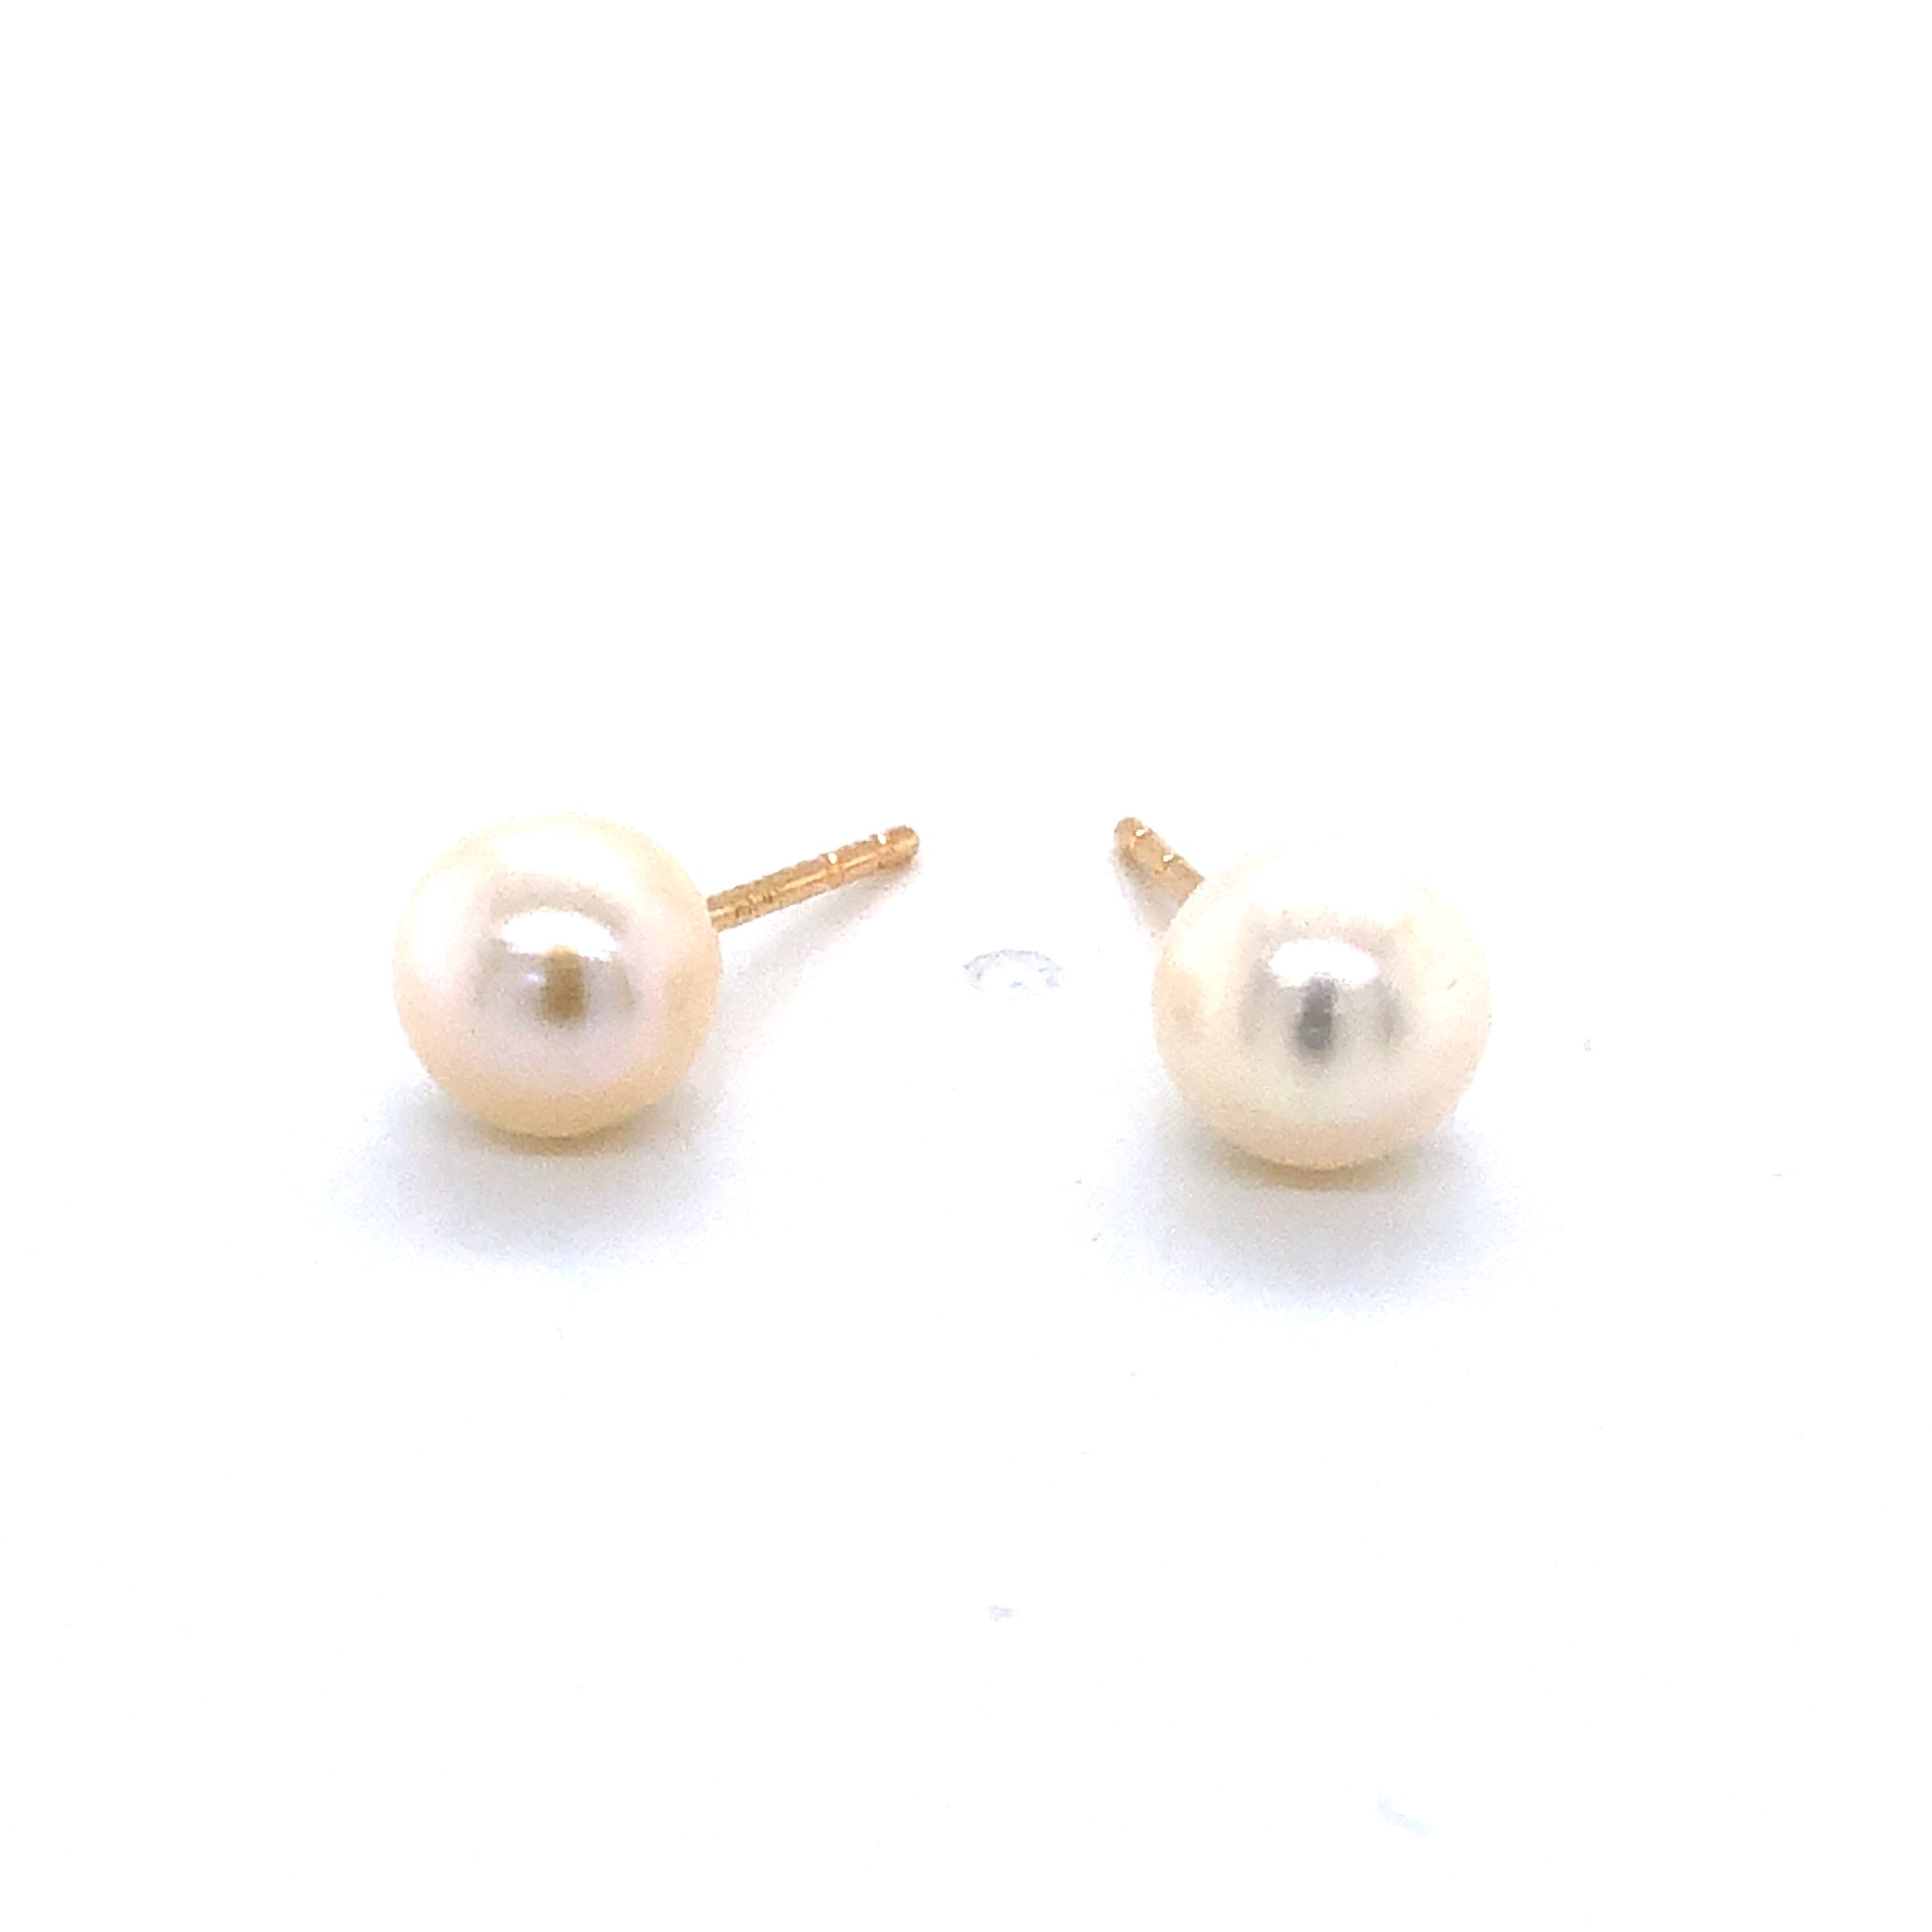 14 Karat Yellow Gold Earrings With 2=6.0 MM White Cultured Pearls